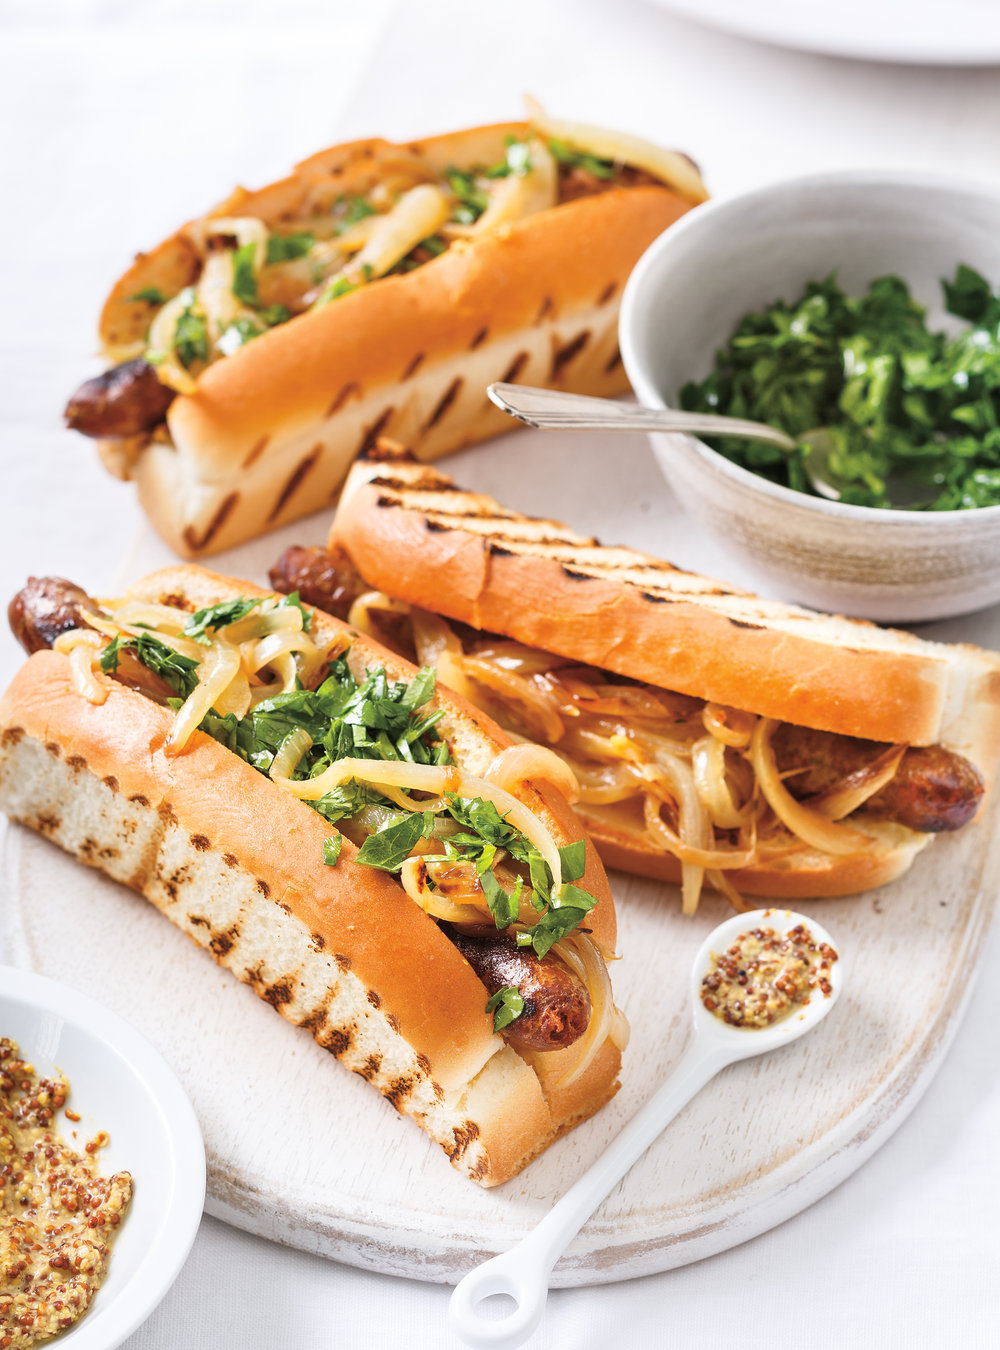 Merguez Hot Dogs with Caramelized Onions